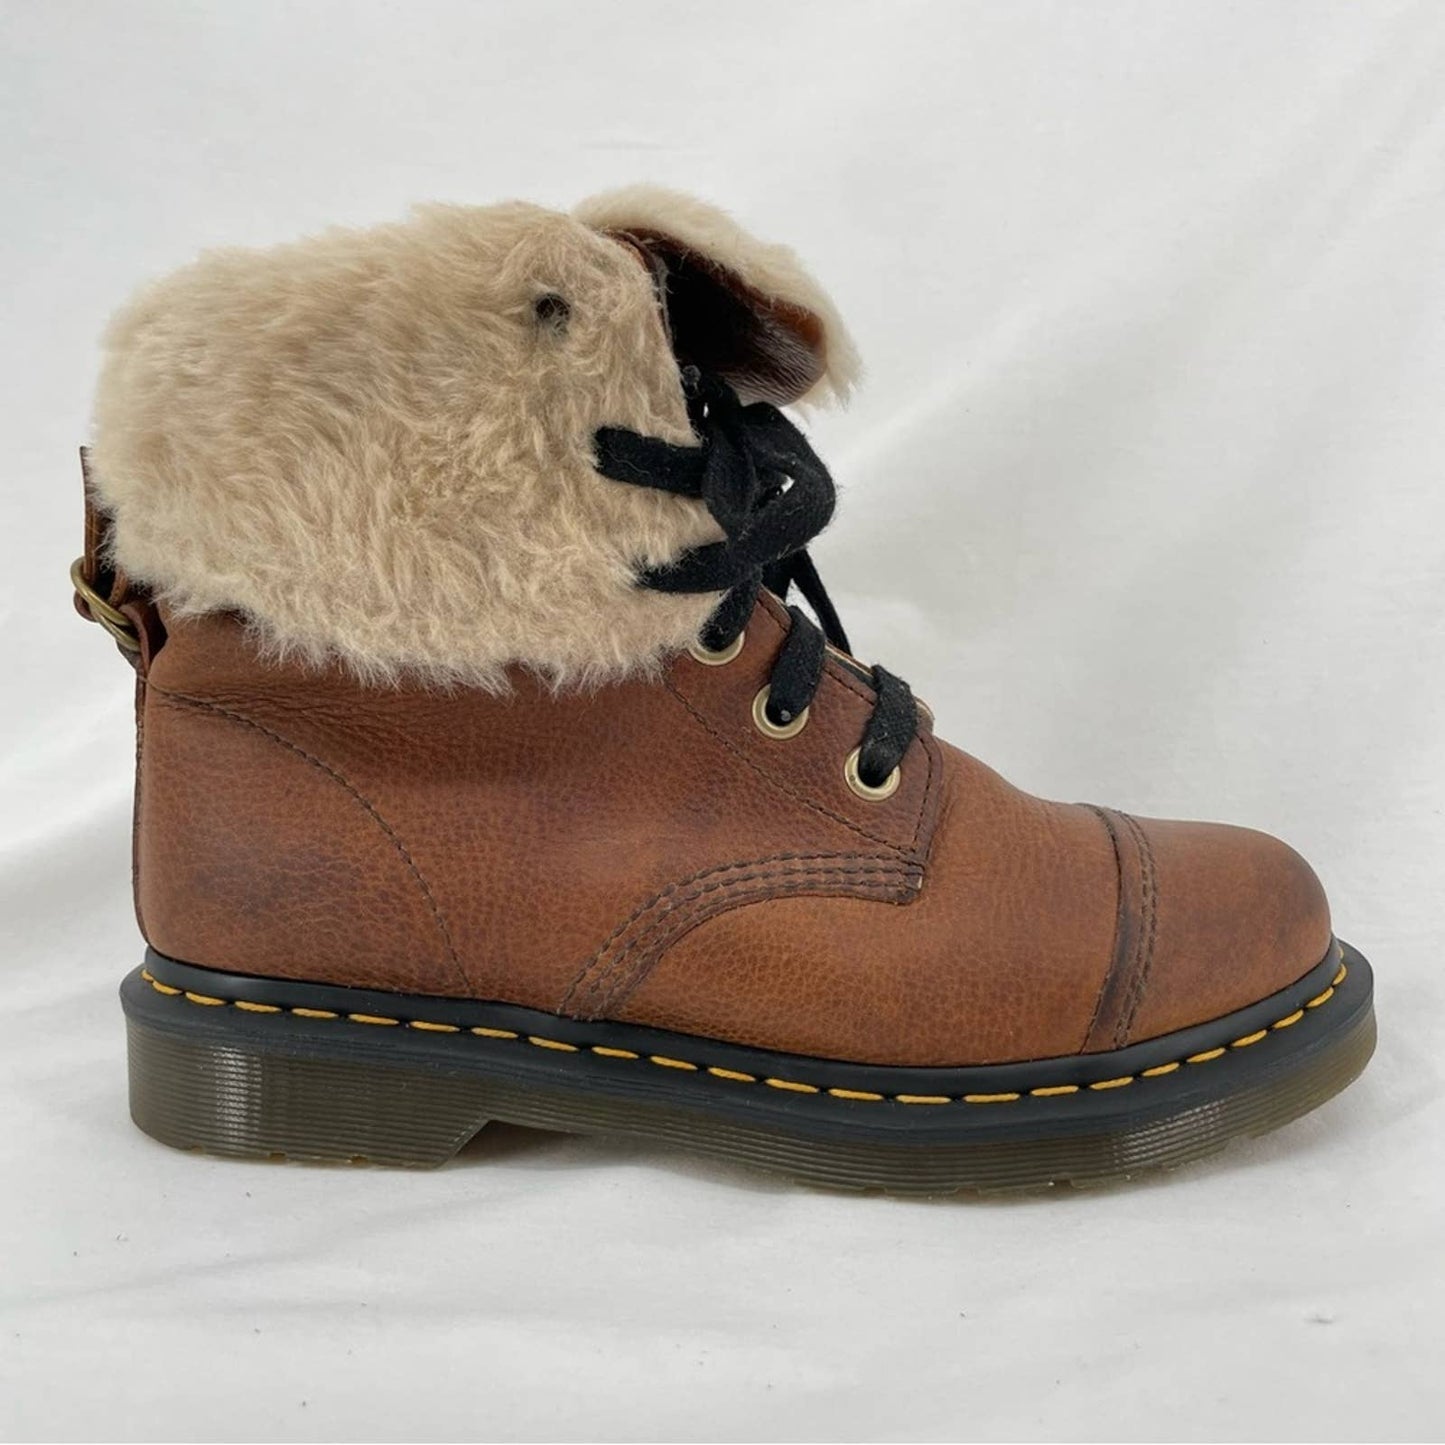 Dr. Martens Aimilita Fur Lined Tab Grizzly Leather Lace Up Winter Biker Boots Size 9